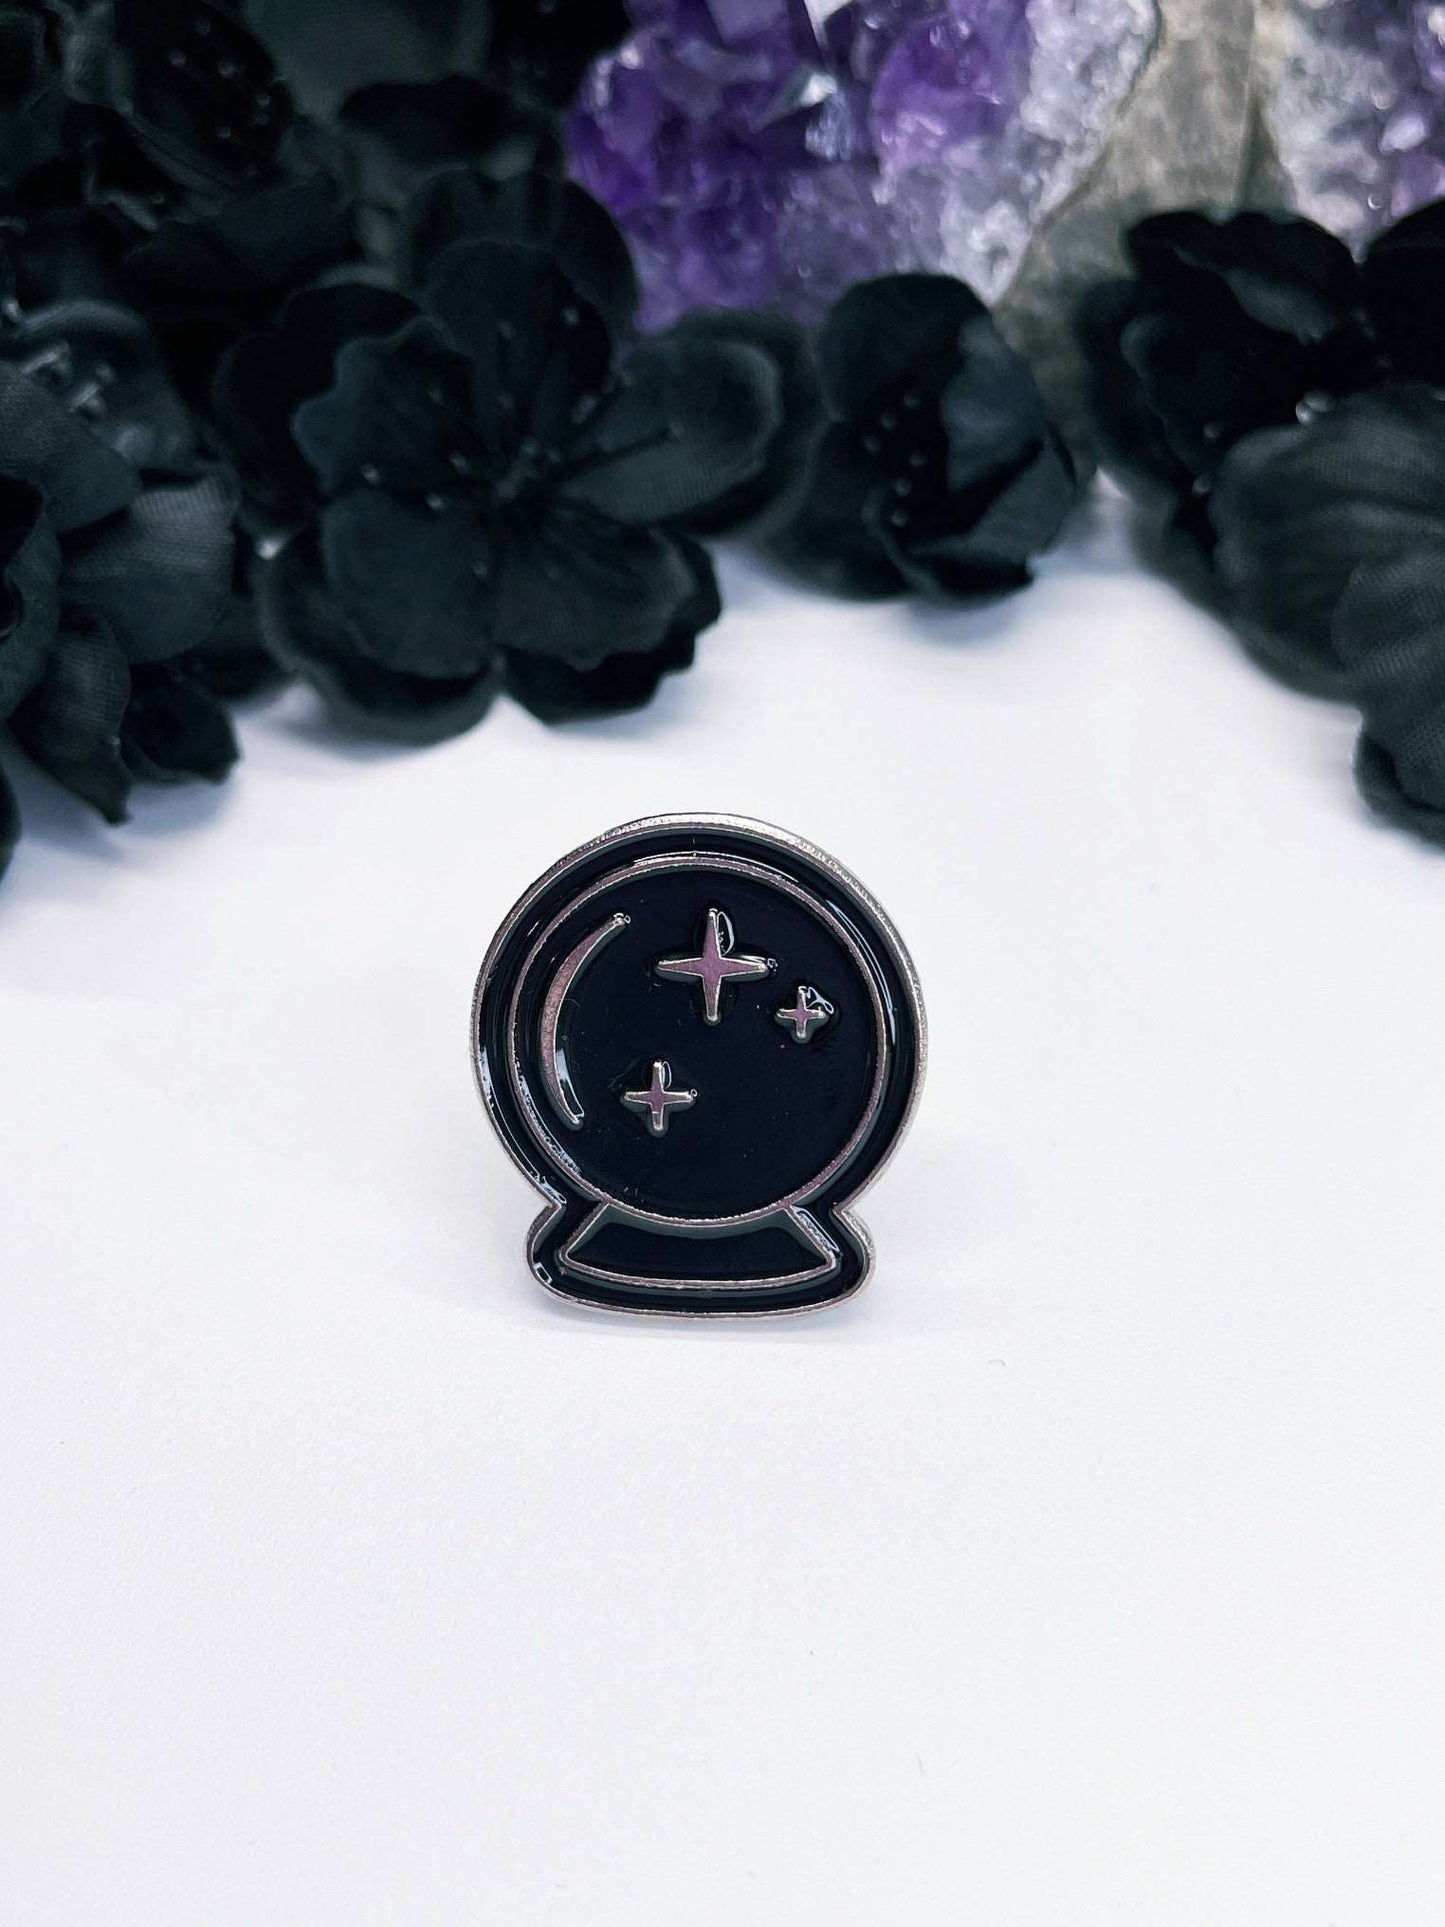 Pictured is an enamel pin of a black crystal ball fortune ball.